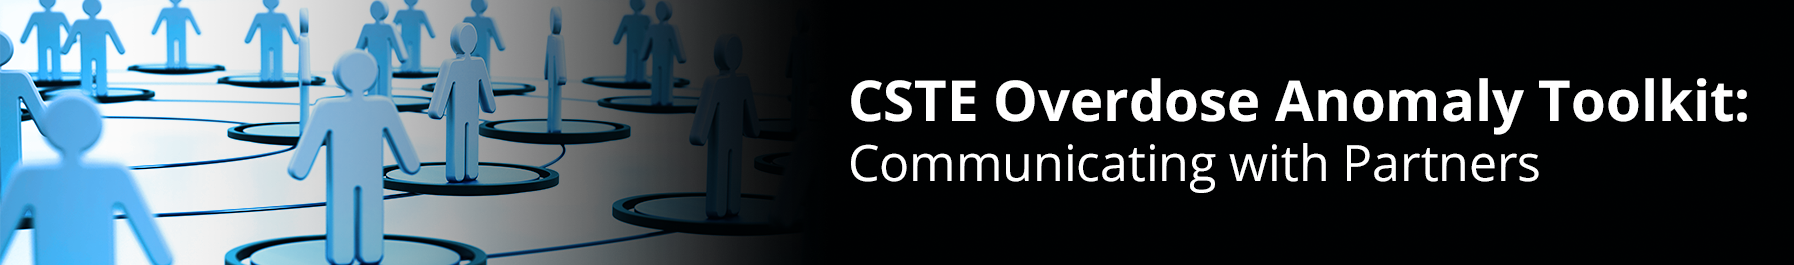 CSTE Overdose Anomaly Toolkit: Communicating with Partners